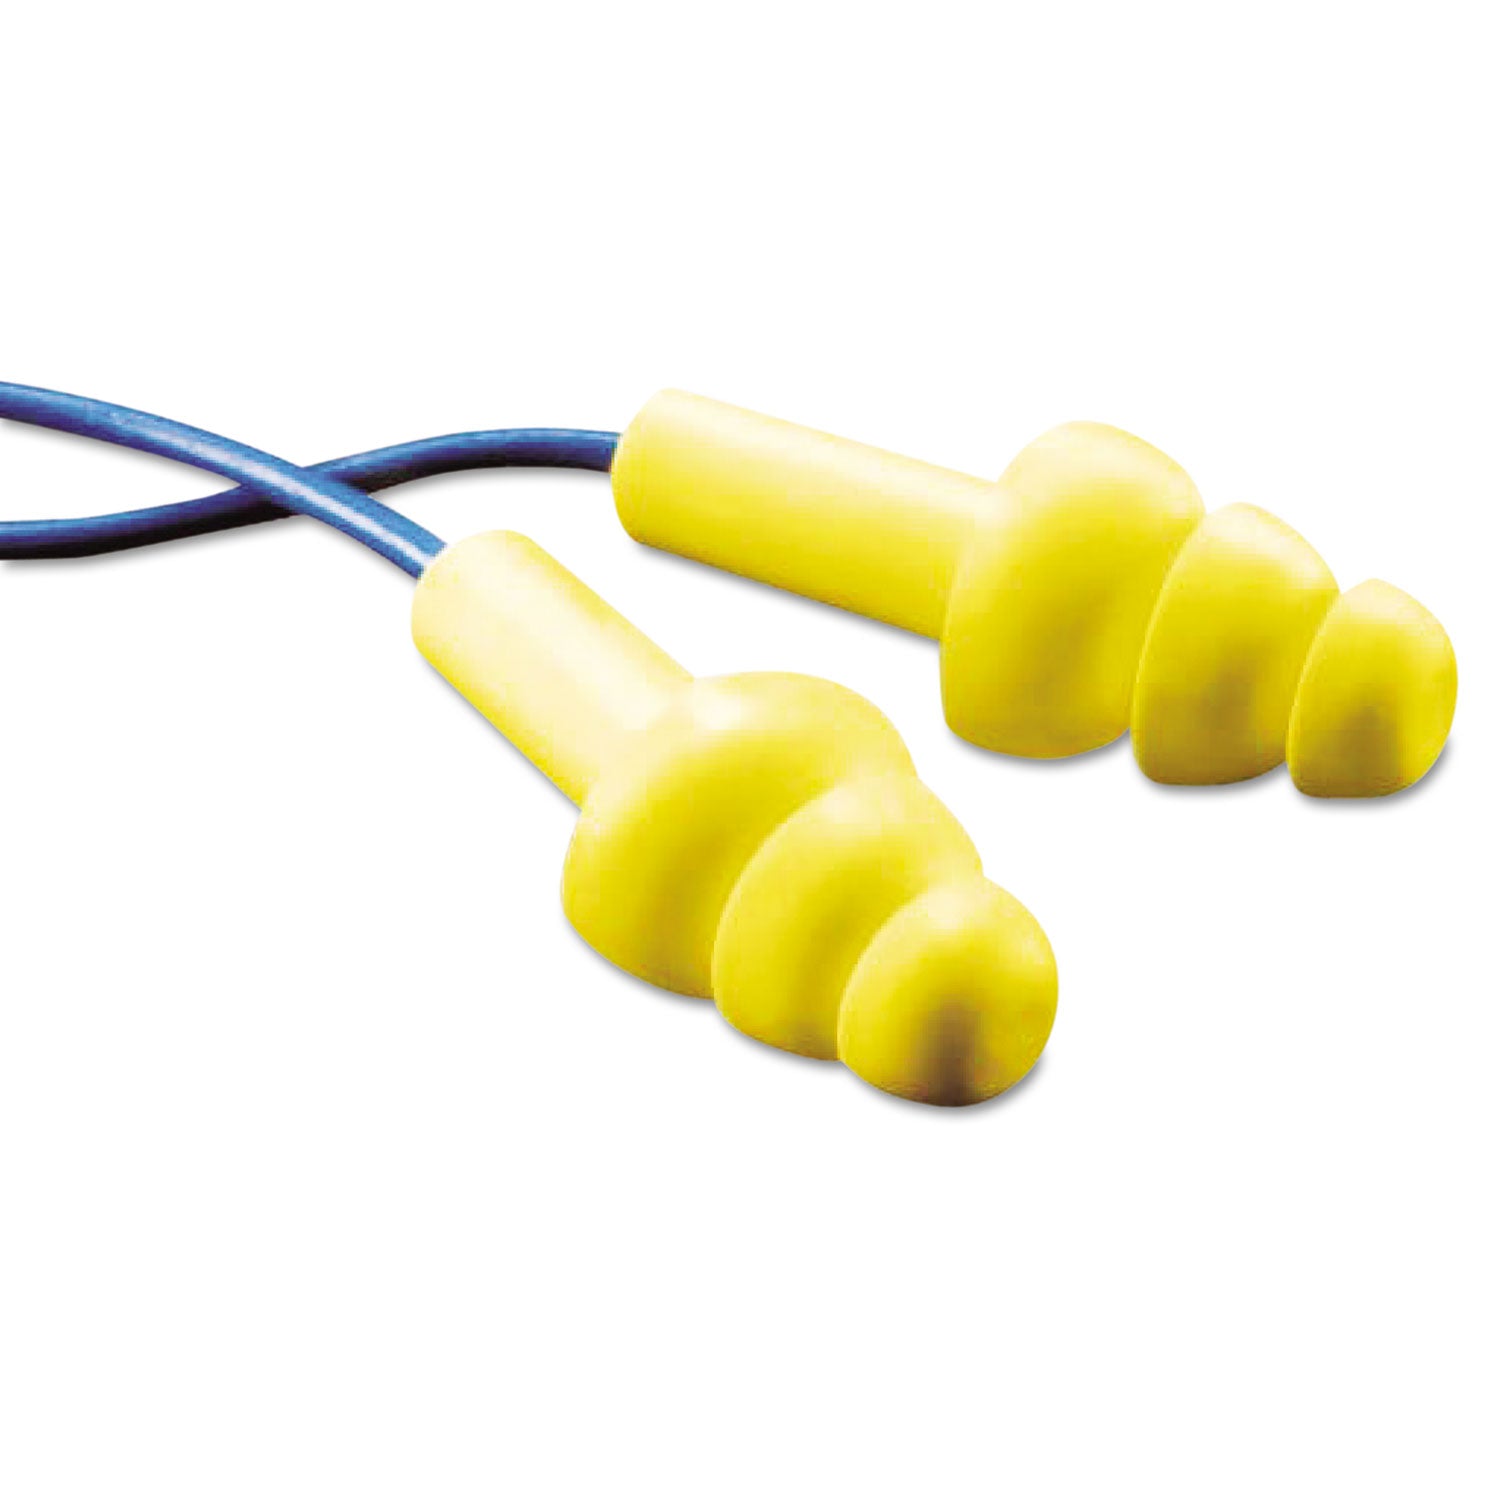 e-a-r-ultrafit-metal-detectable-reusable-earplugs-corded-25db-nrr-blue-yellow-100-pairs_mmm3404007 - 1